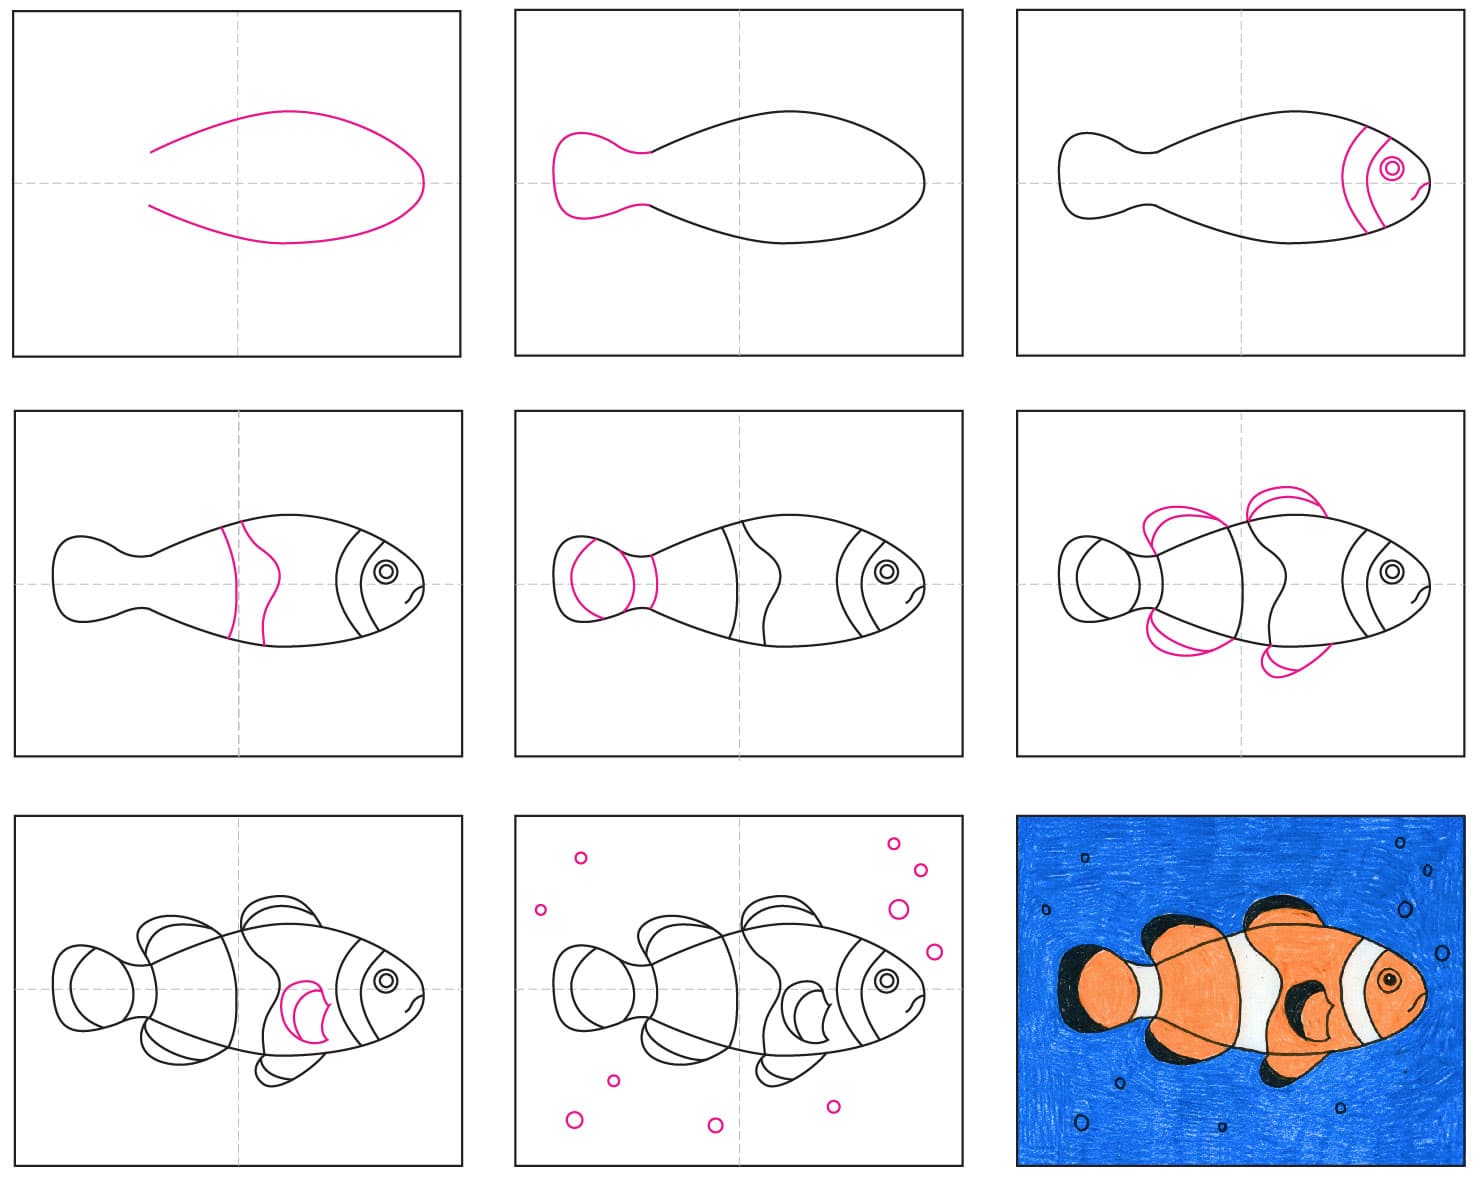  How To Draw Clown Fish in the world Check it out now 